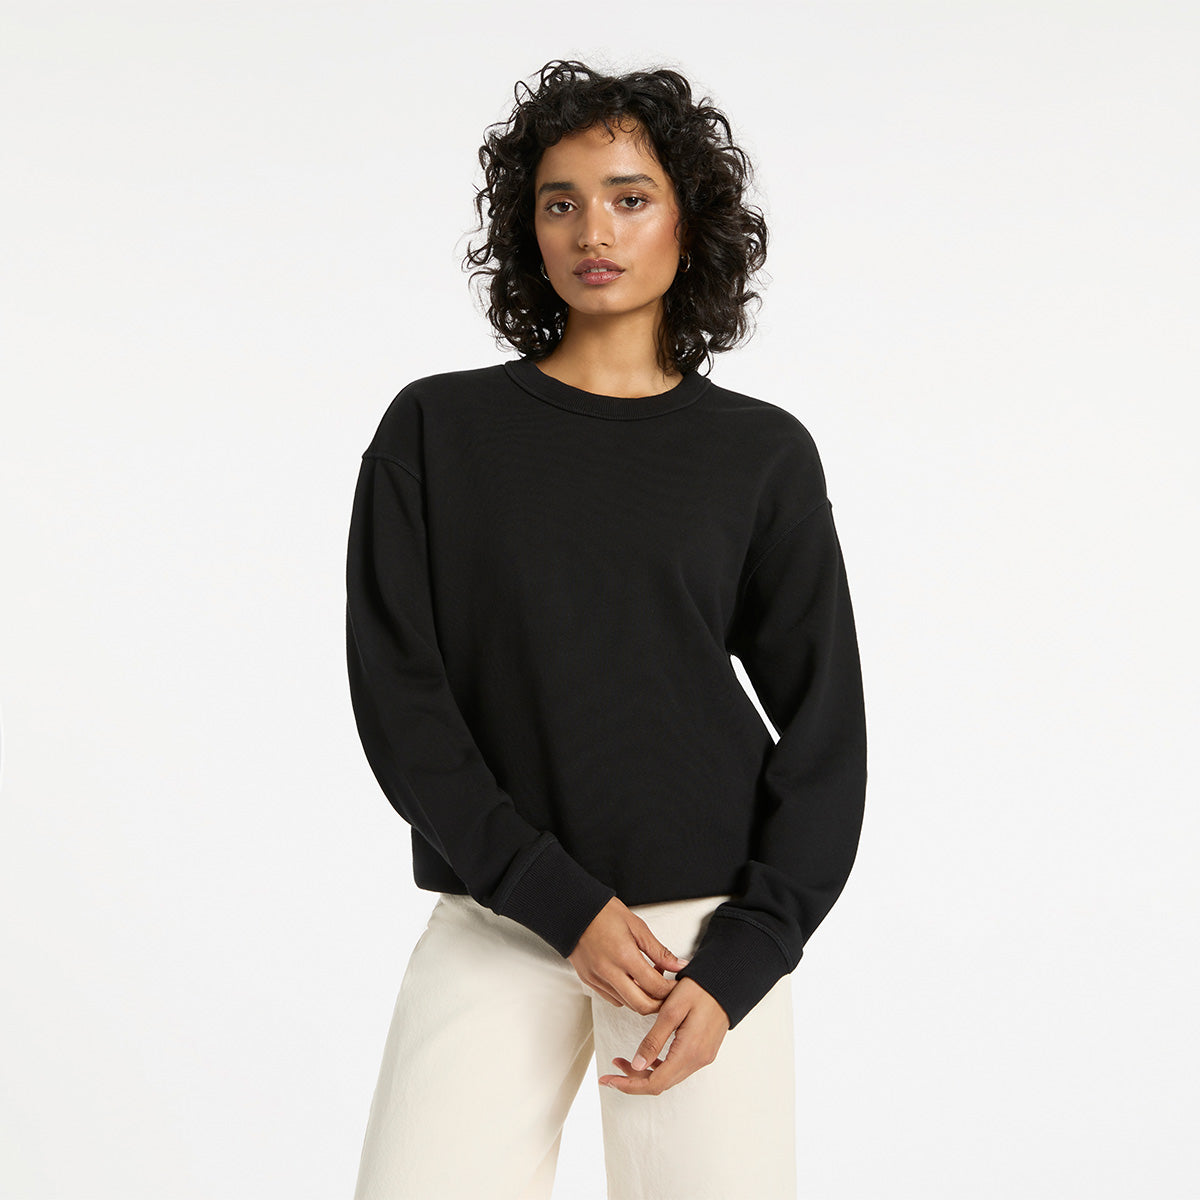 Status Anxiety Could be Nice Women's Jumper Soft Black